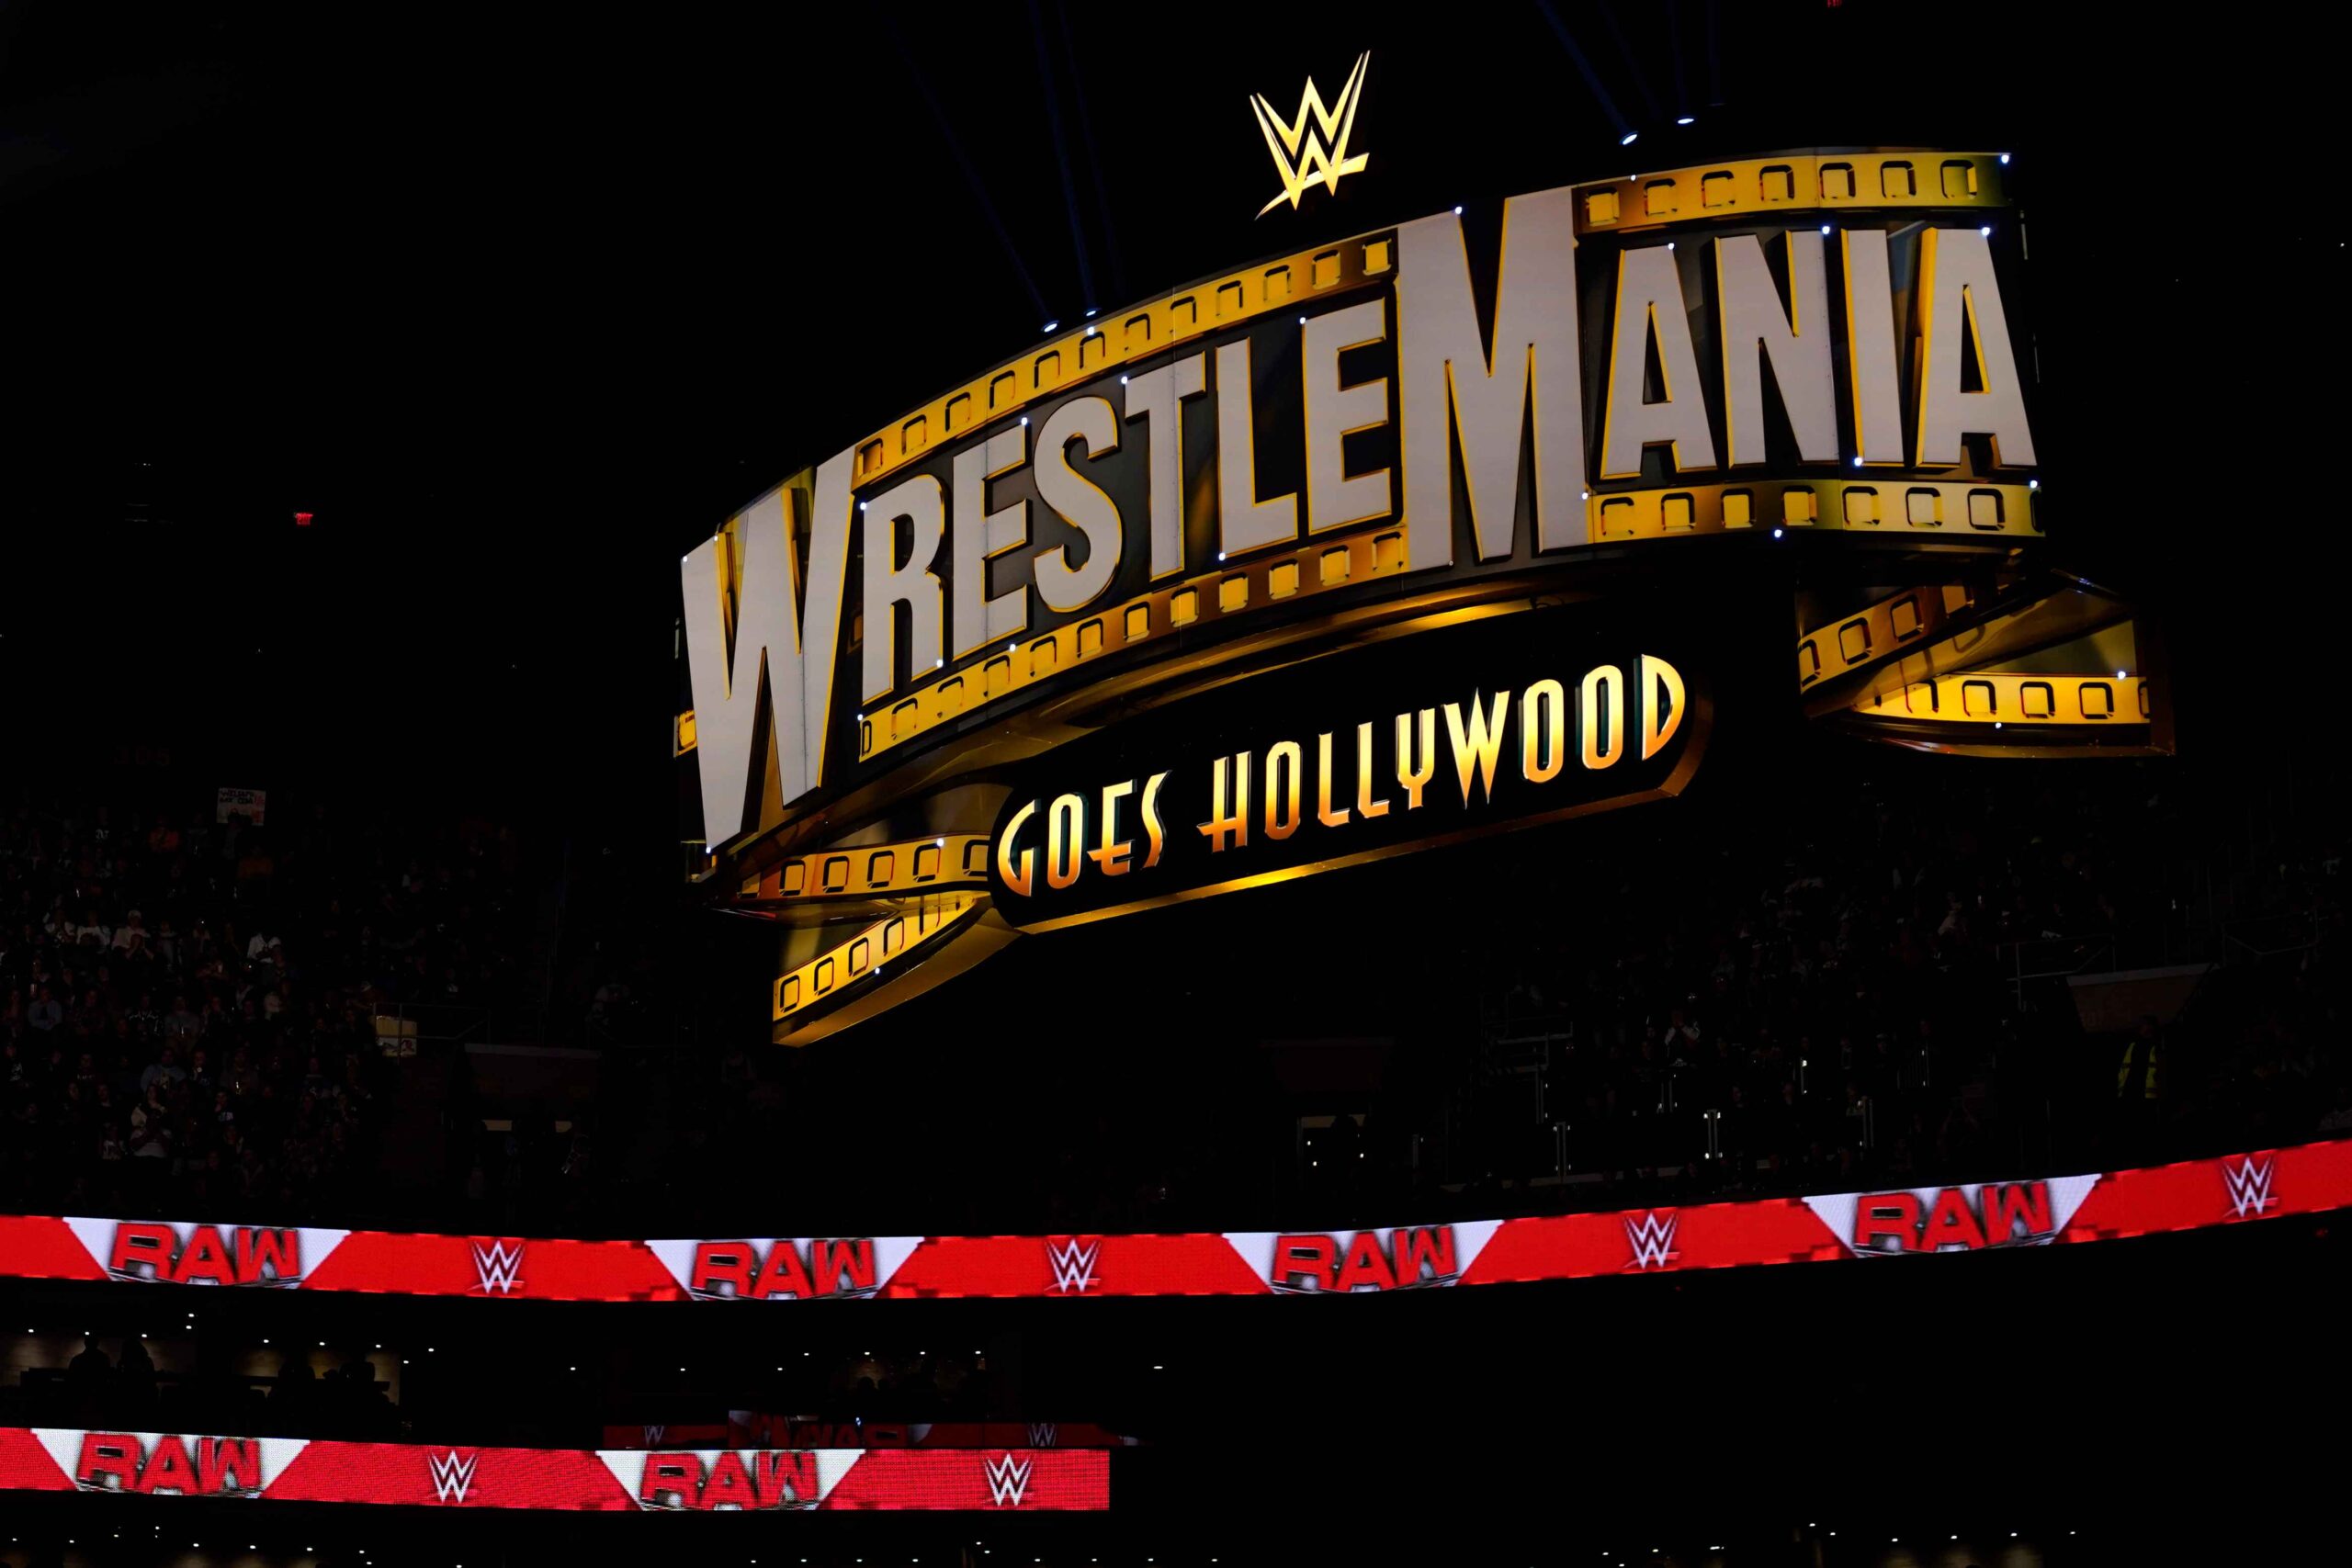 Netflix finalized a $5 billion, 10-year deal with World Wrestling Entertainment (WWE) to provide exclusive coverage for its flagship show “Raw” in 2025. (AP Photo/Charles Krupa, FIle)